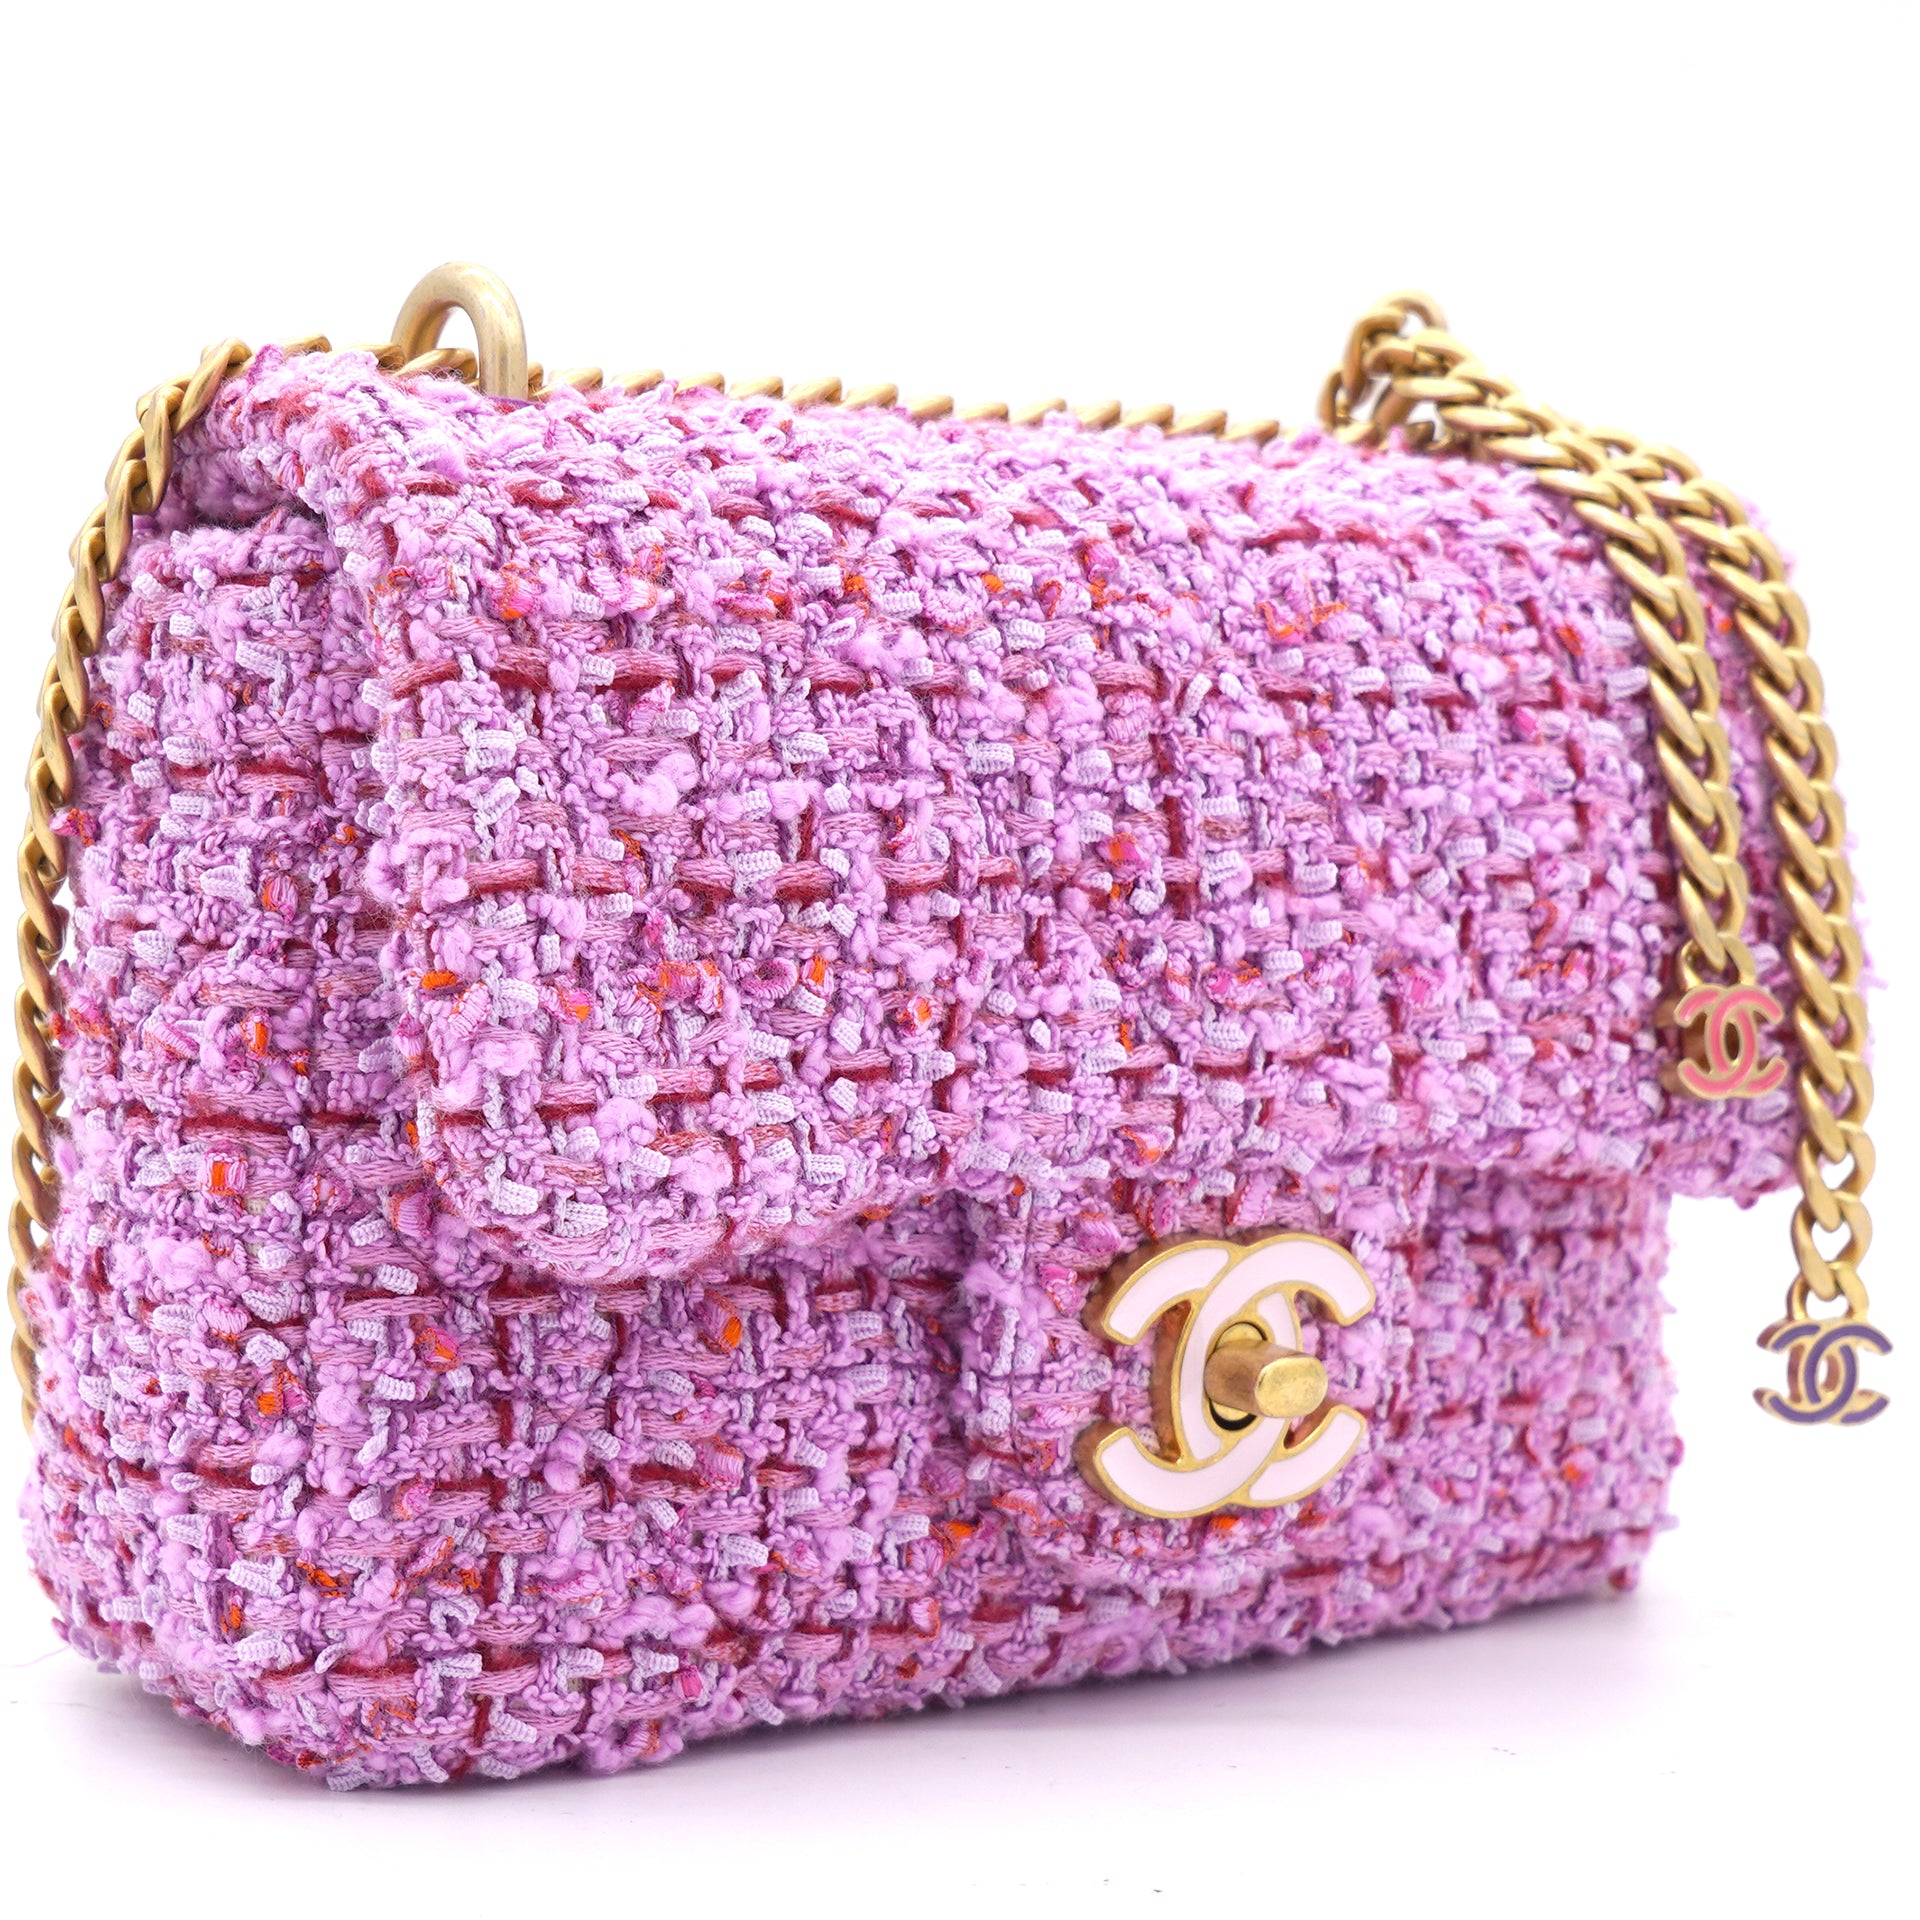 Chanel - Authenticated Gabrielle Handbag - Tweed Pink for Women, Very Good Condition